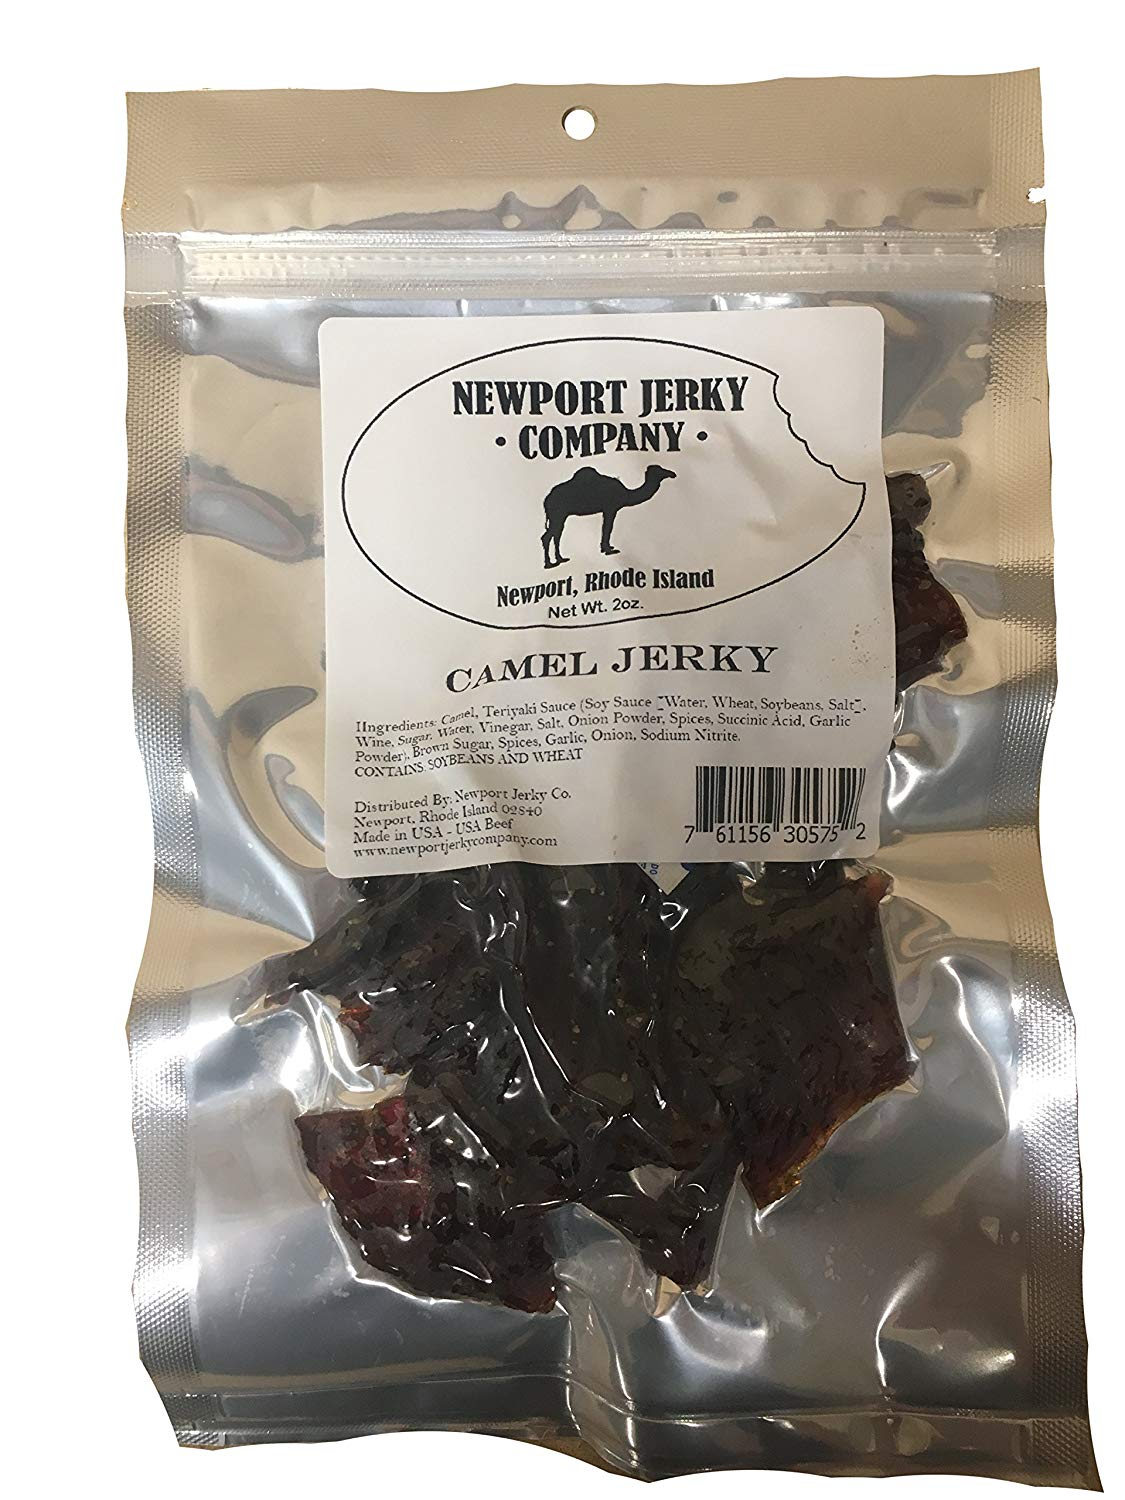 Camels are a dry animal, but now they're even drier.<br><br>Give actual camel jerky a shot <a href="https://amzn.to/2S5eNd8" "nofollow" target="_blank">here</a>.